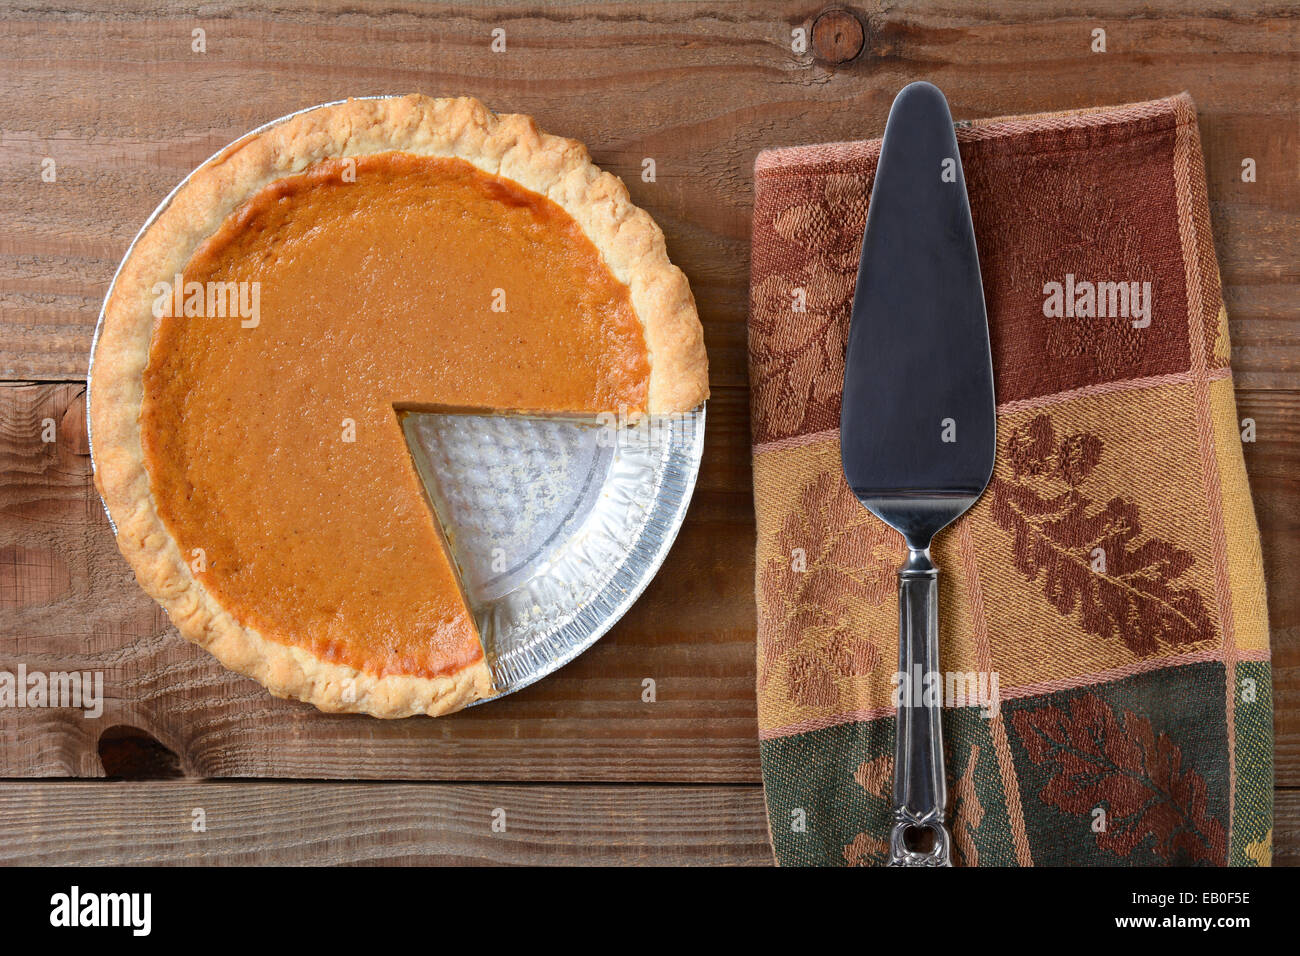 High angle shot of a pumpkin pie that has been cut into. Shot on a rustic wood table with a Autumn themed napkin and server by i Stock Photo